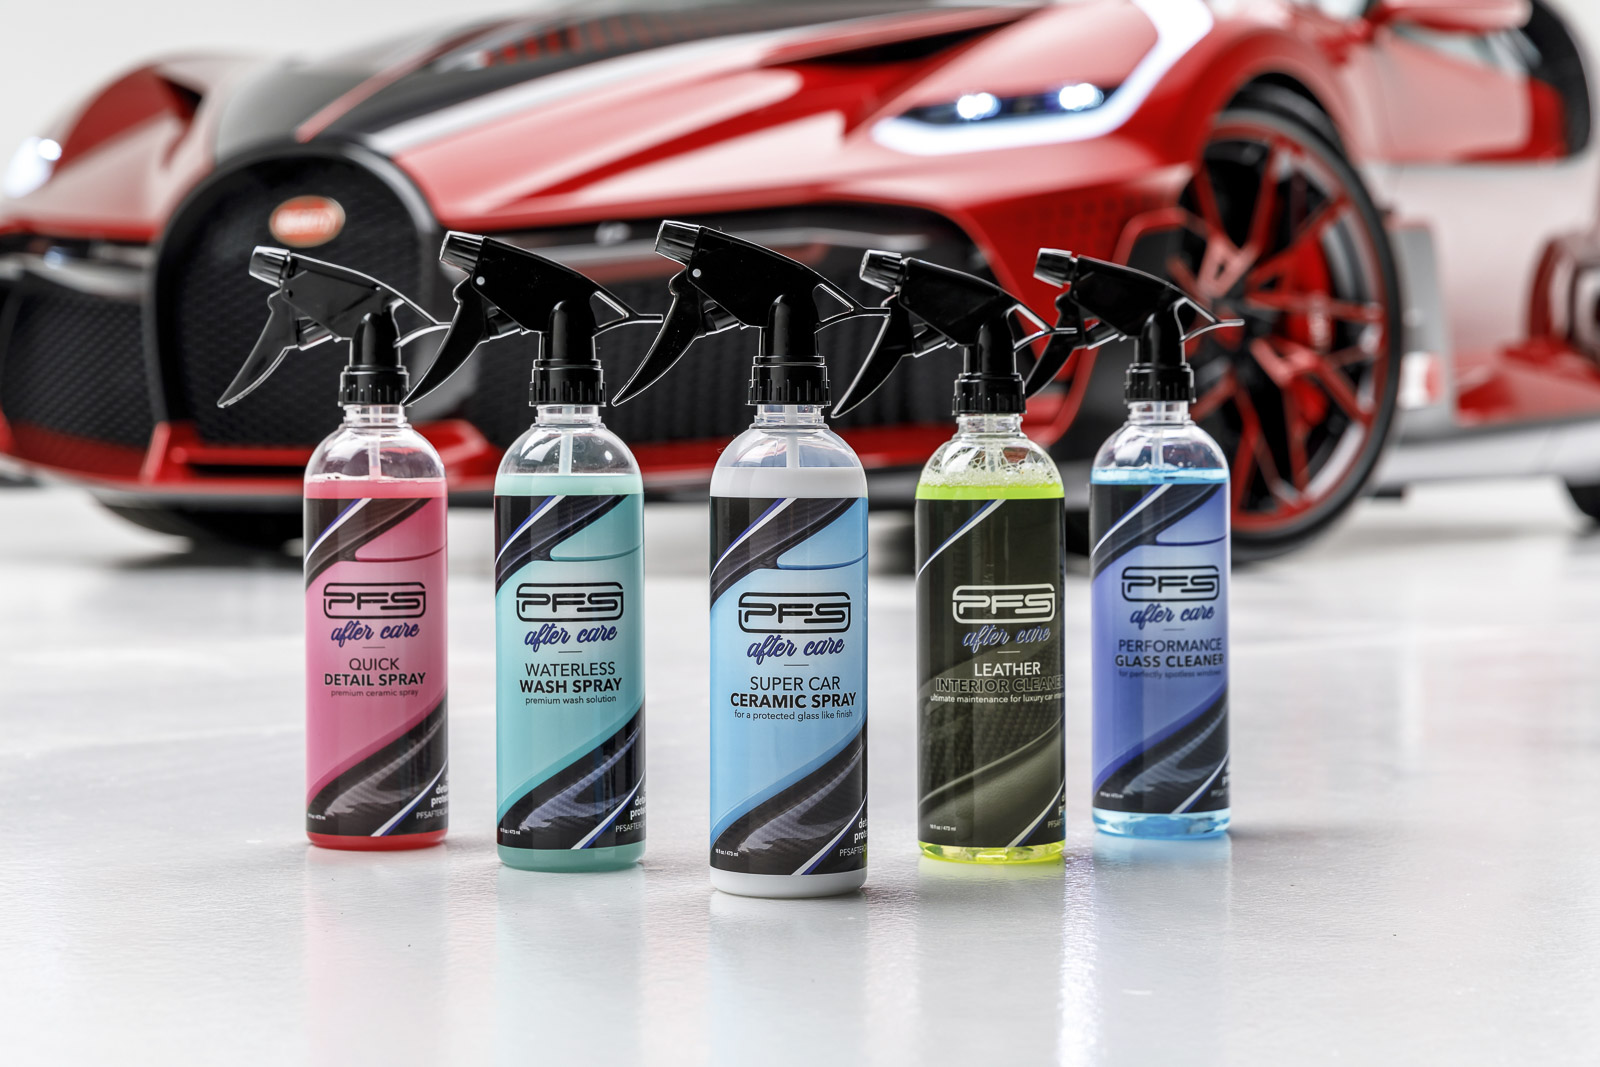 PFS After Care Automotive Products Feature